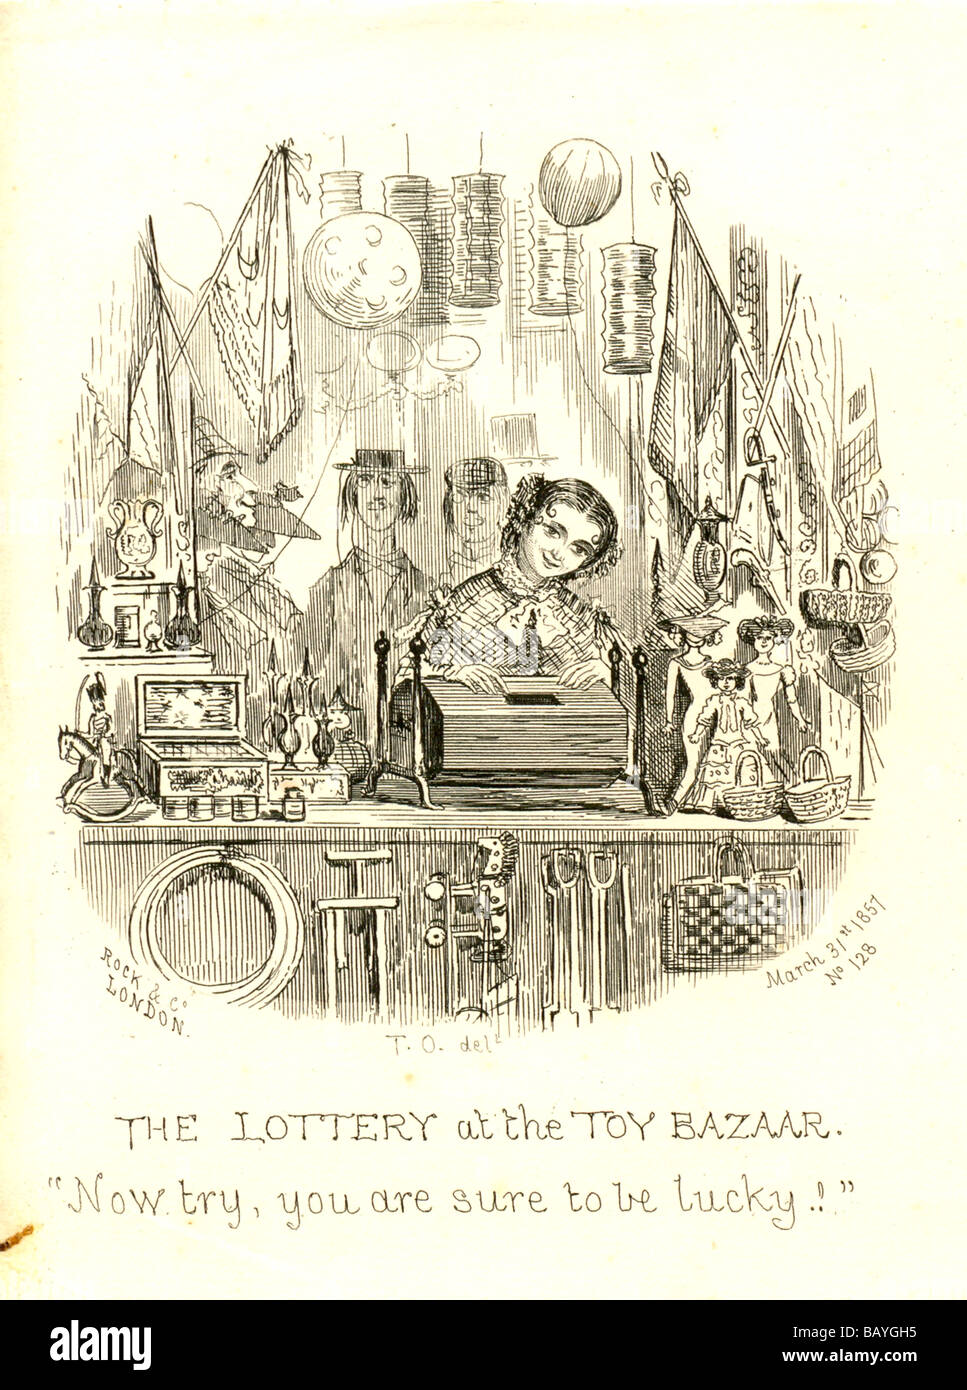 The Lottery at the Toy Bazaar by Thomas Onwhyn published by Rock & Co 1857 Stock Photo